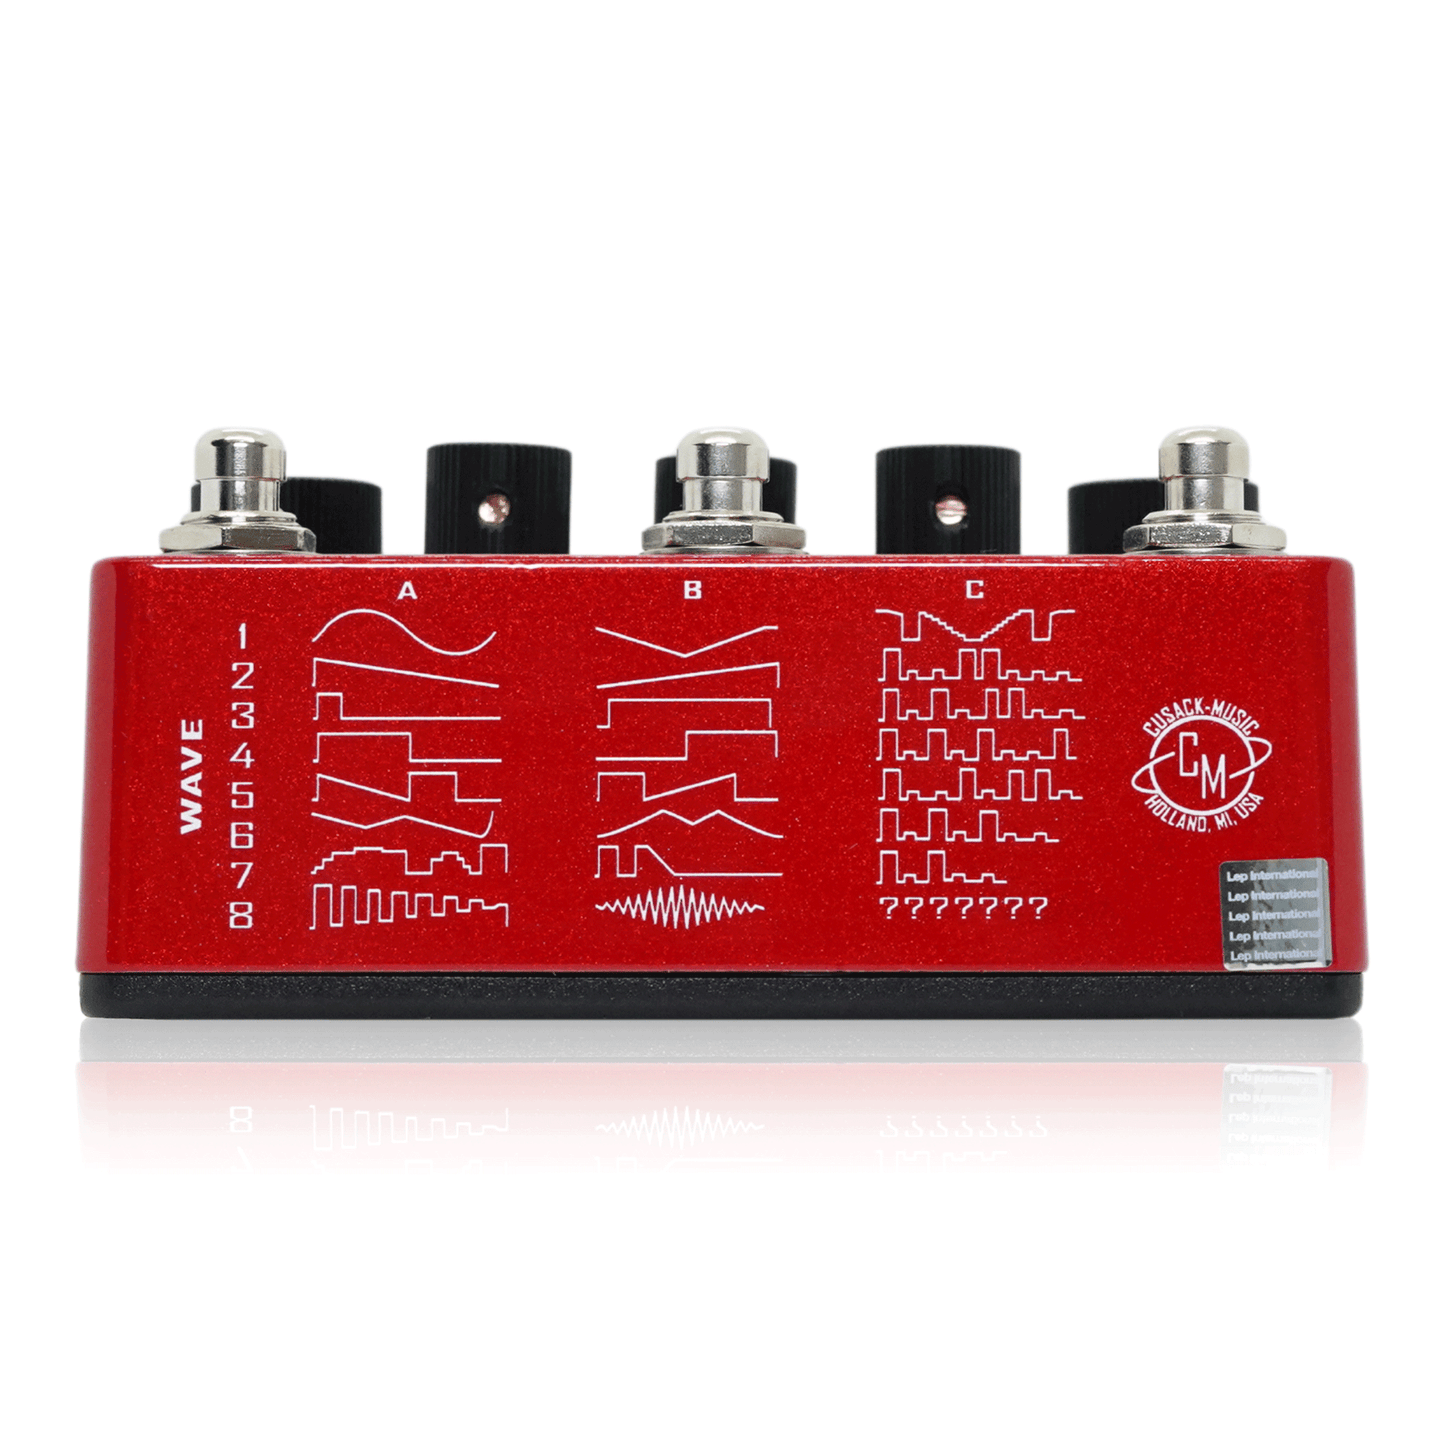 Cusack Music / Tap-A-Whirl V4